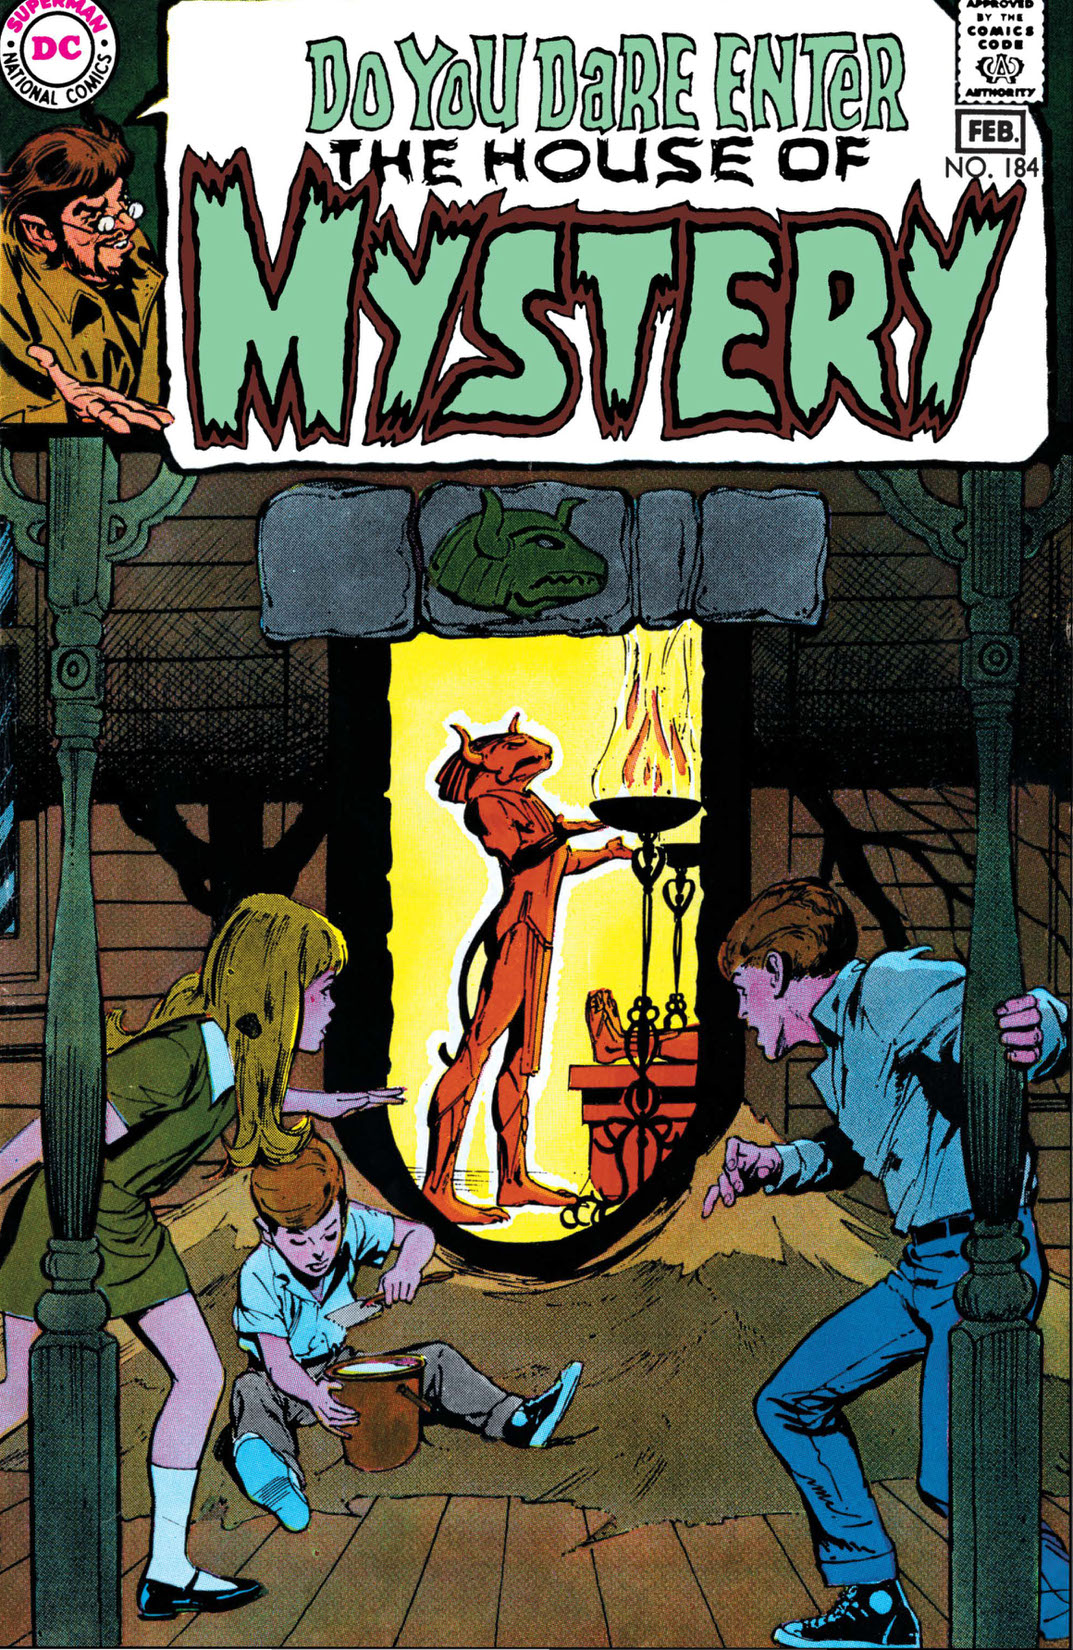 House of Mystery (1951-) #184 preview images